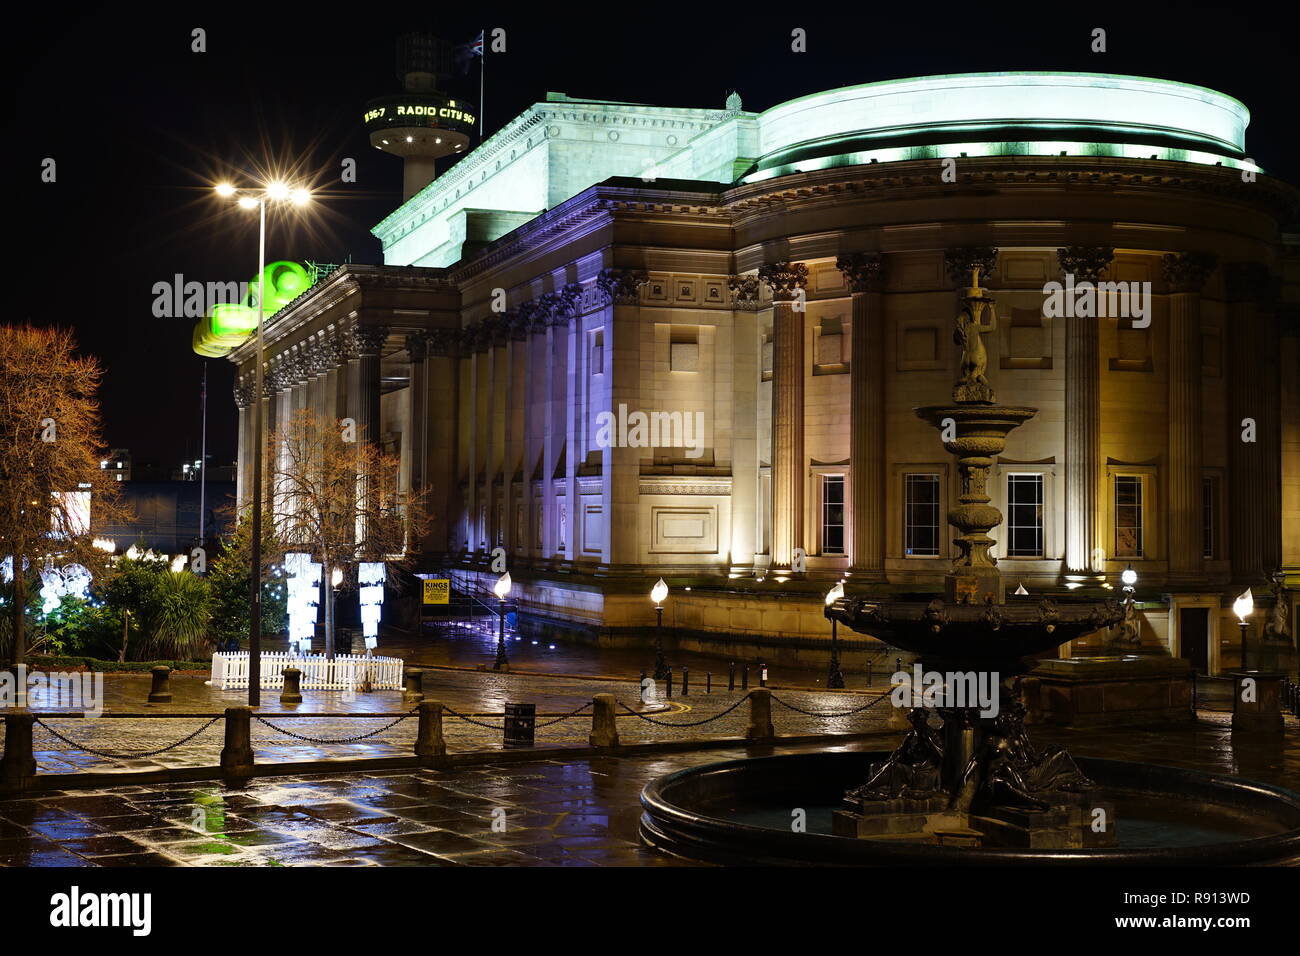 St George’s Hall, Lime Street, Liverpool, St John’s Beacon in background, Steble Fountain in the foreground. Image taken in December 2016. Stock Photo